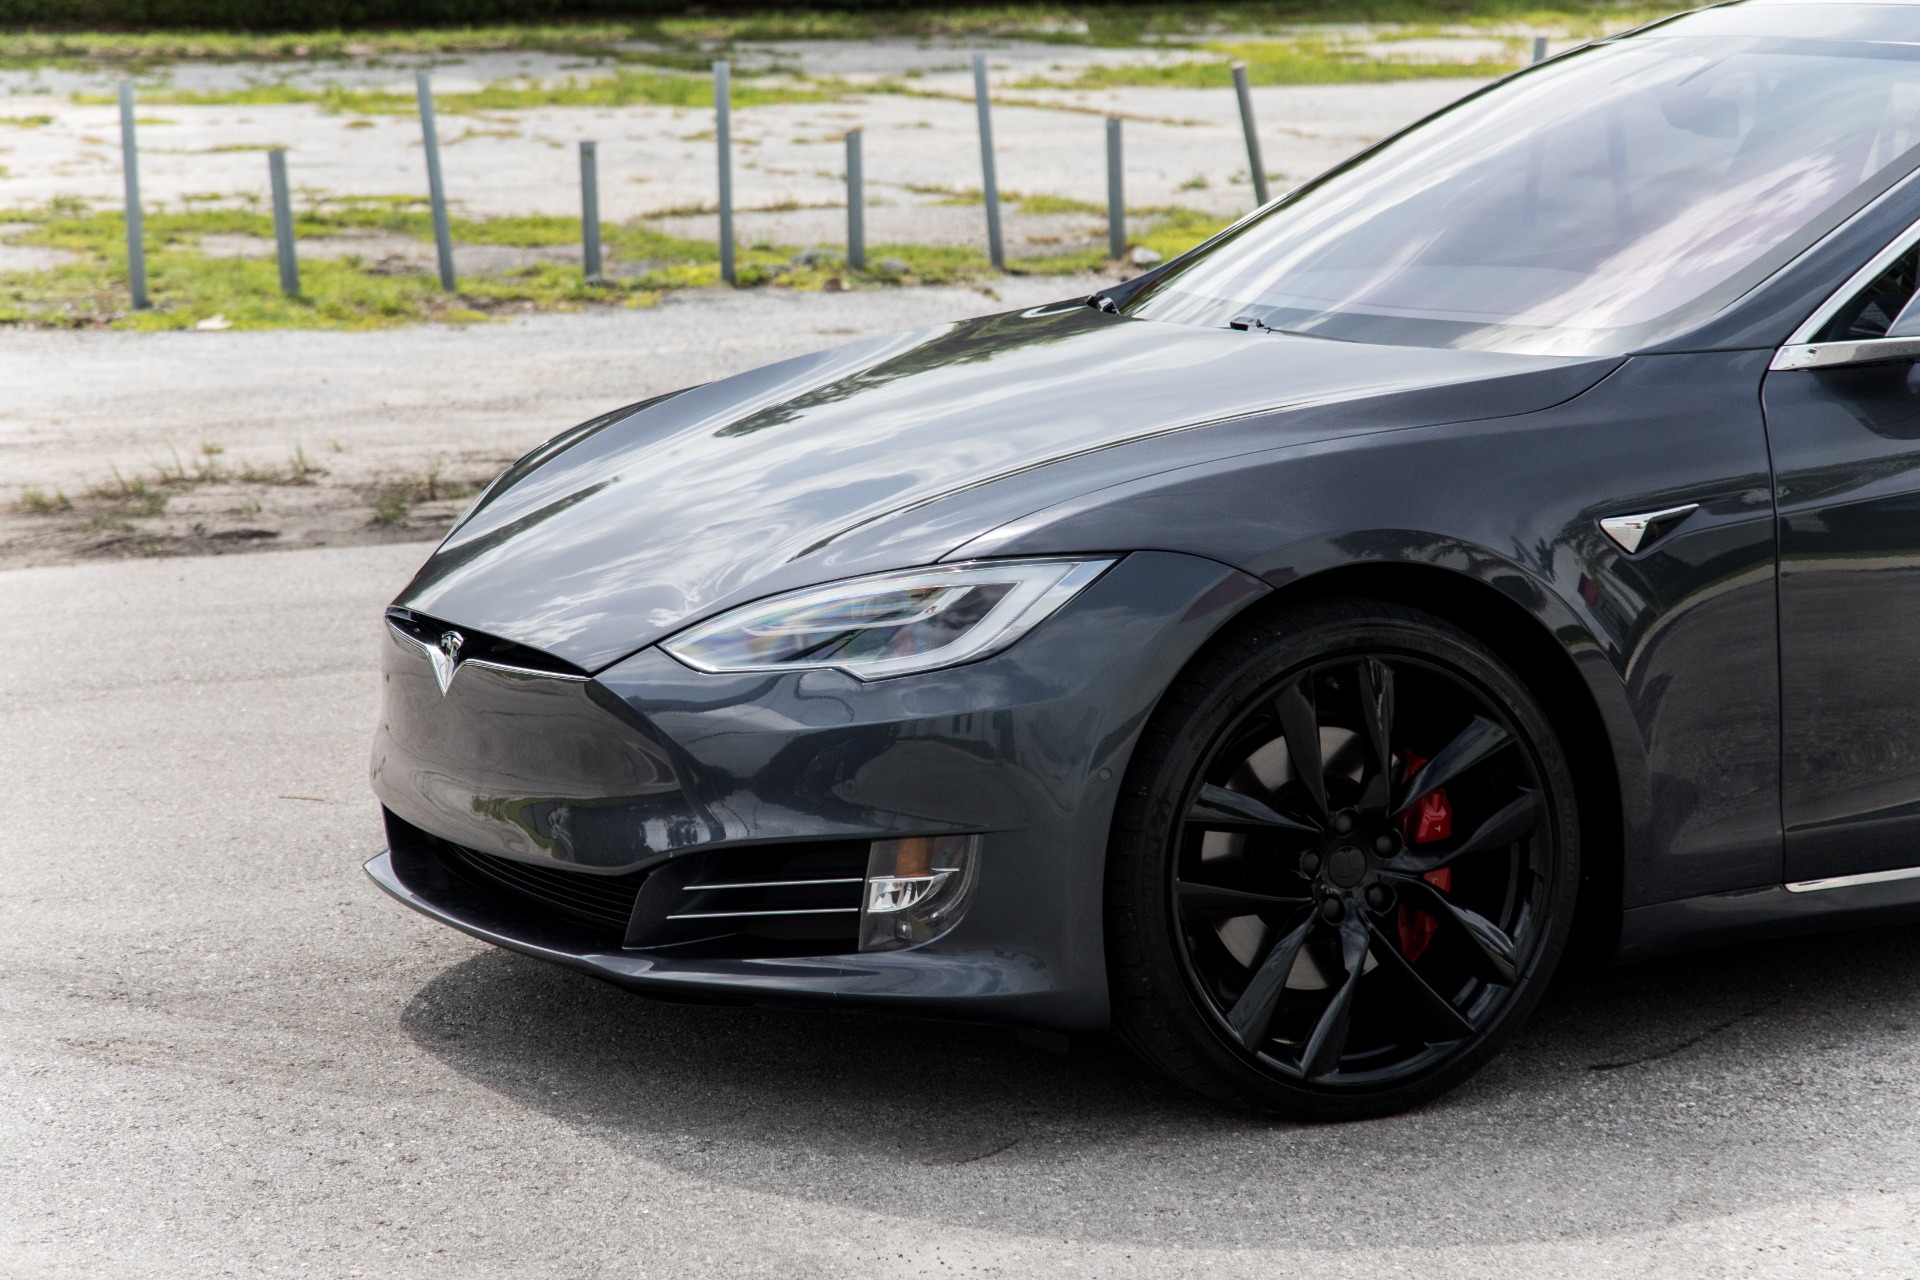 Used 2018 Tesla Model S P100D For Sale ($89,900) | Marino ...